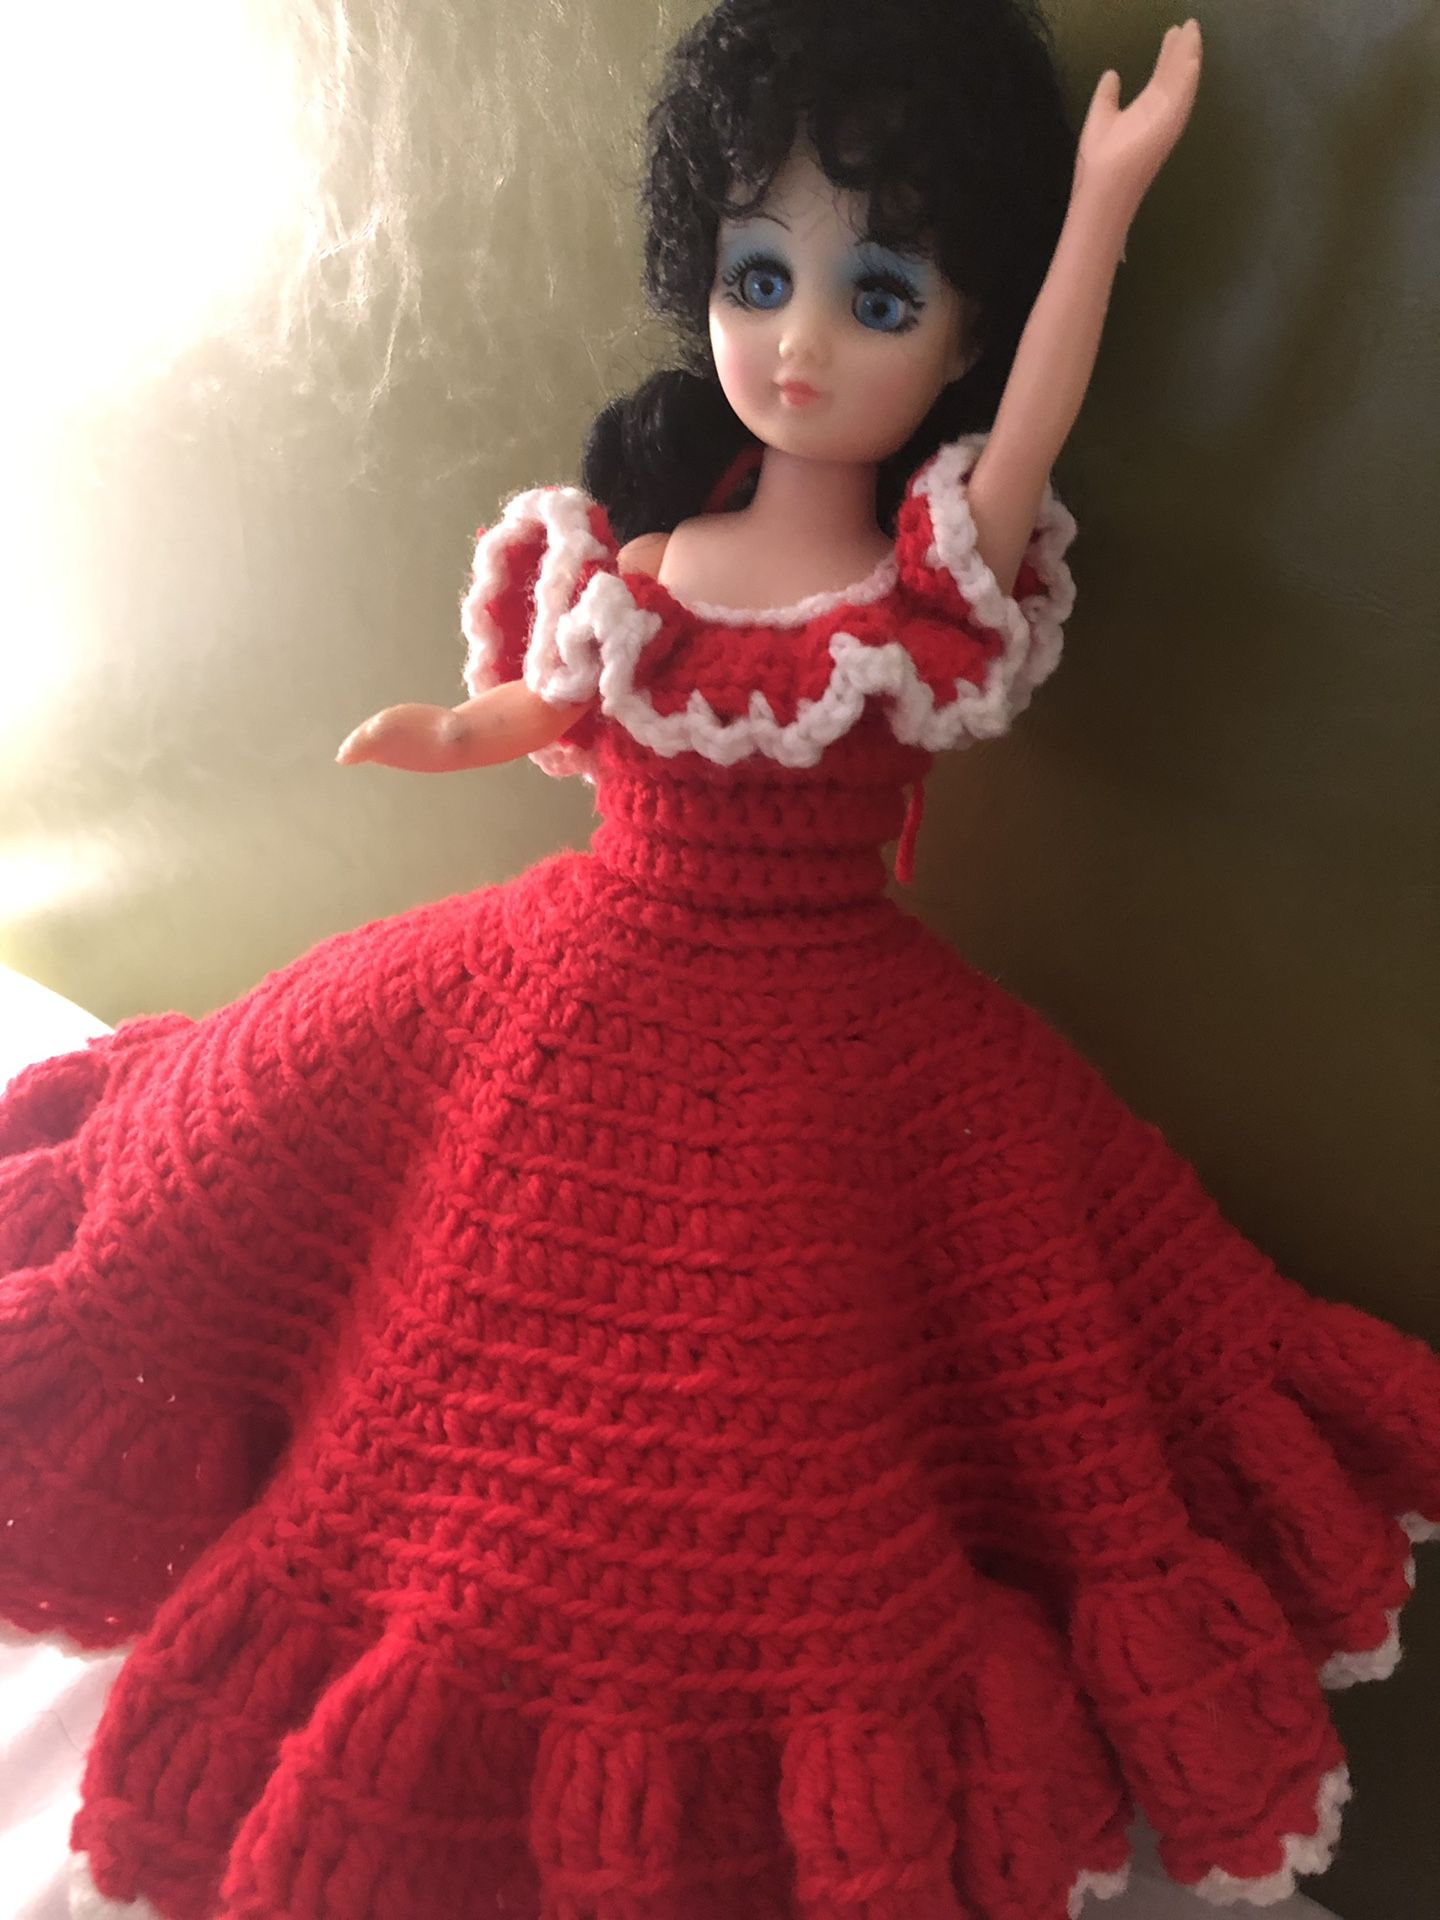 Vintage doll with crochet dress